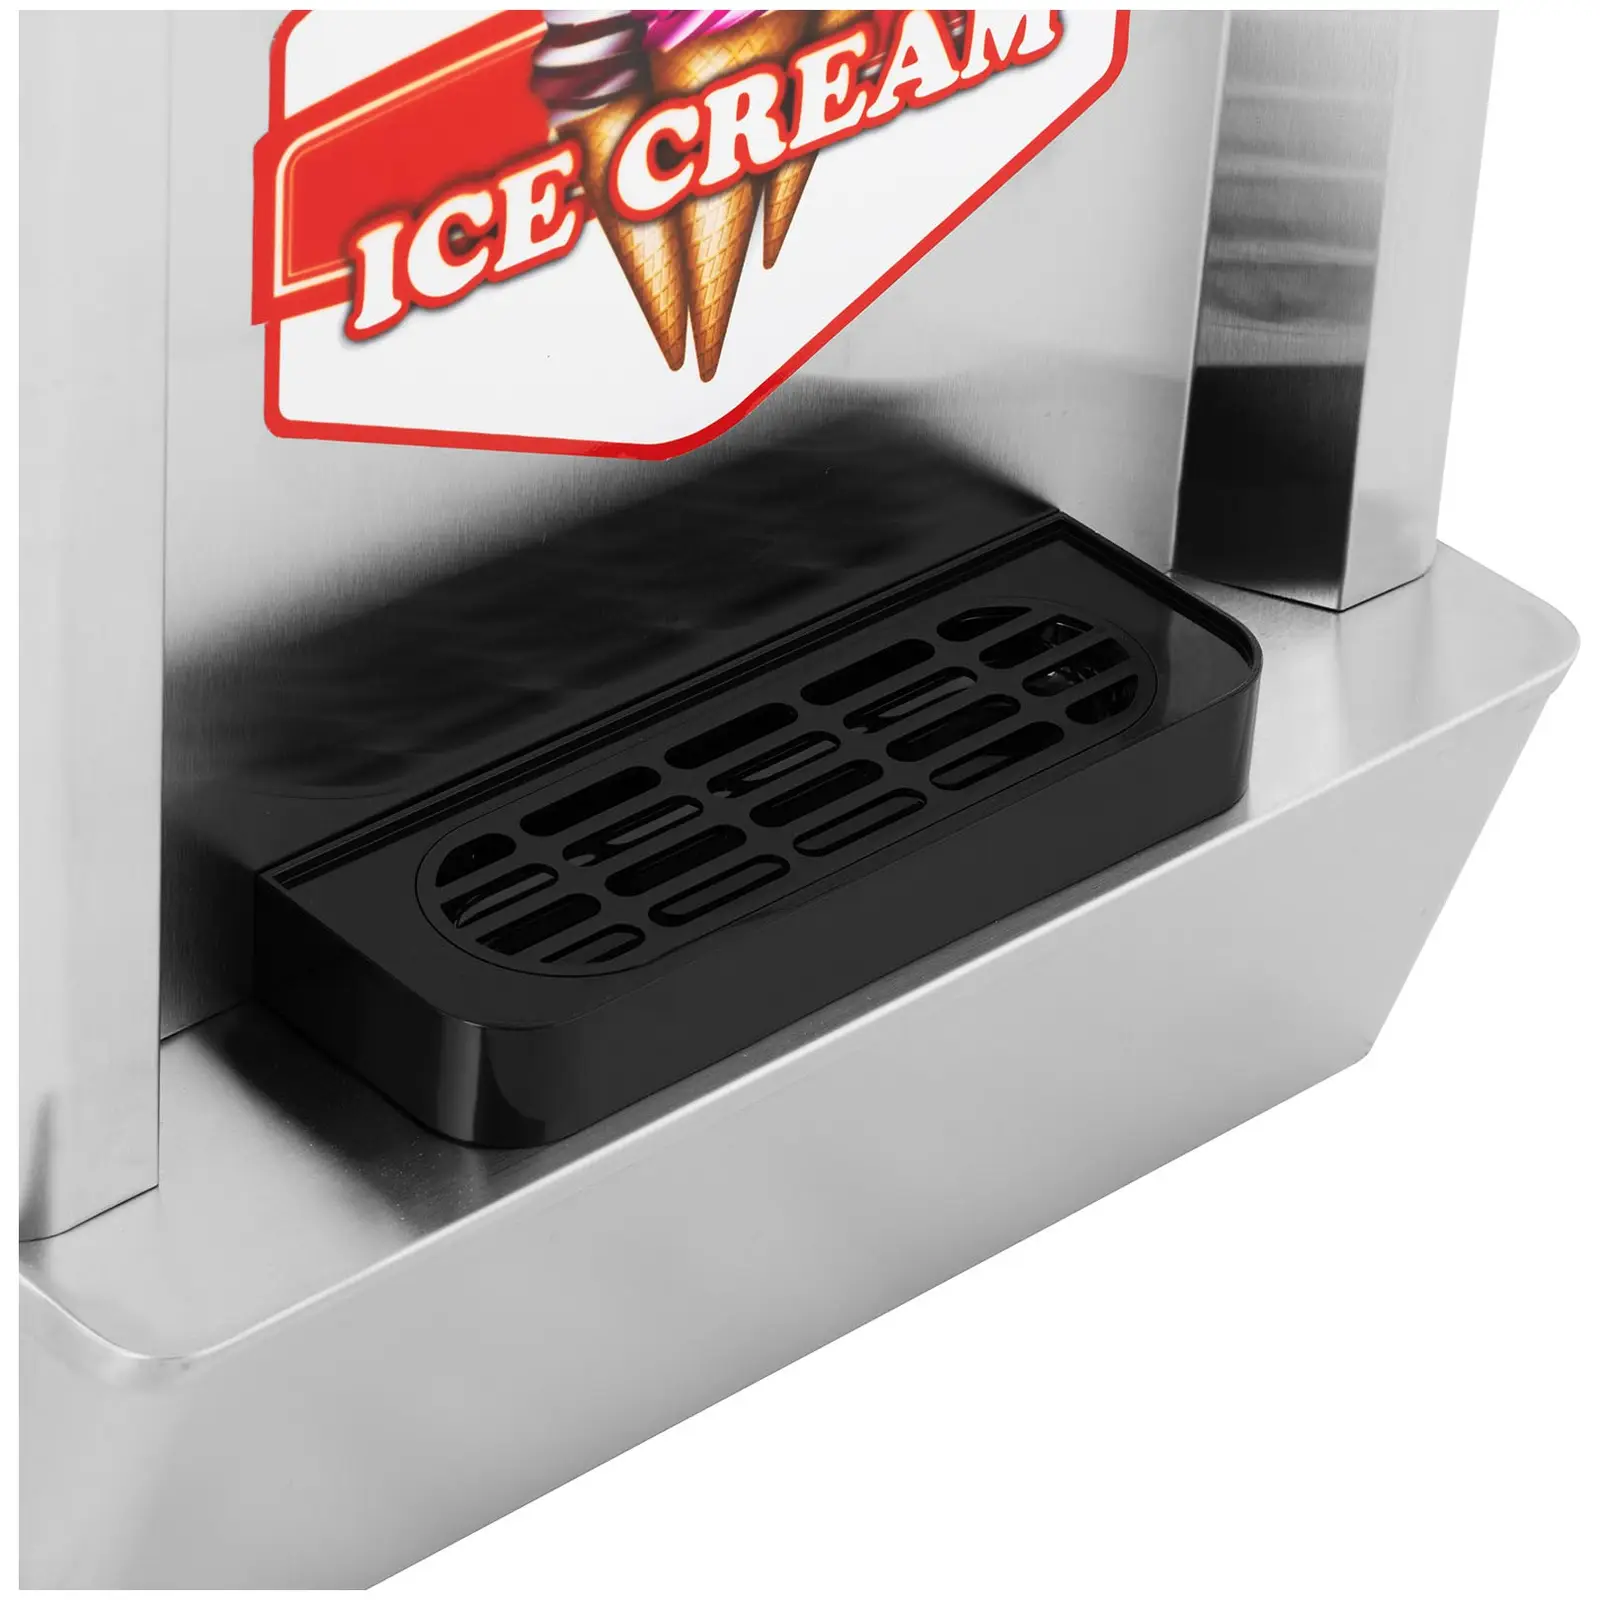 Soft Serve Ice Cream Machine - 1550 W - 23 l/h - 3 Flavours - Royal Catering